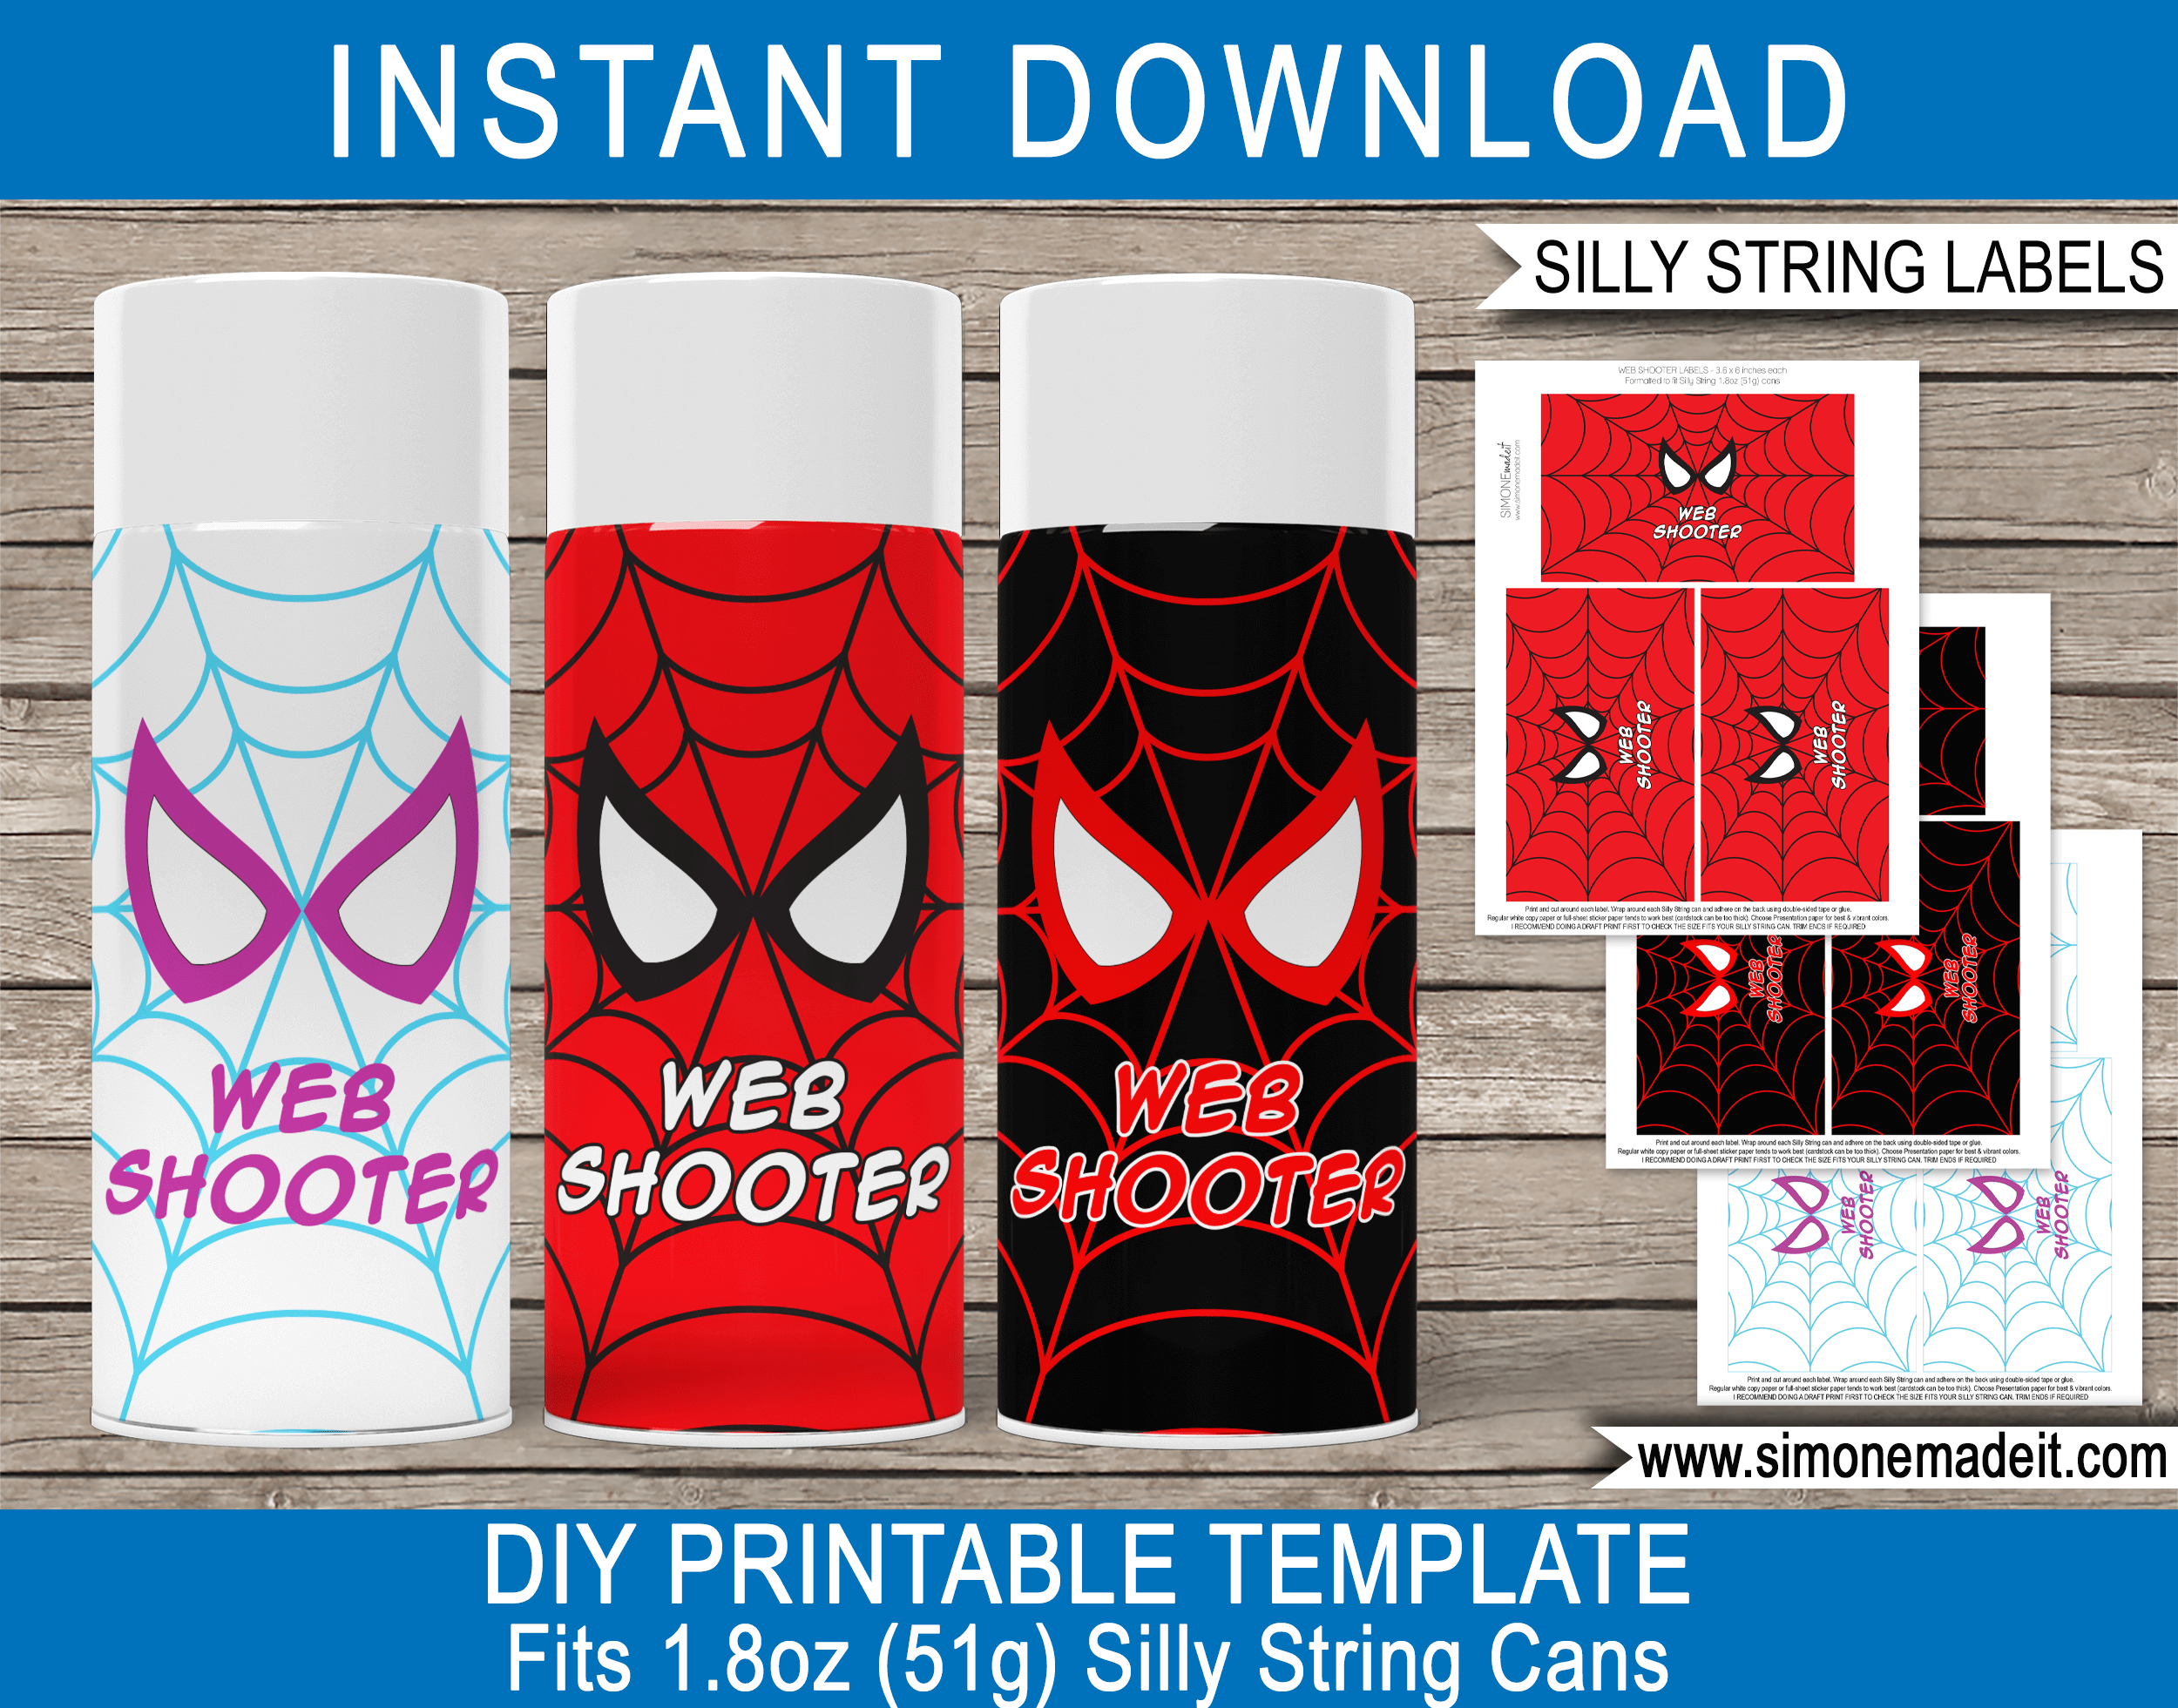 Printable Spiderman Web Shooter Silly String Labels Template Bundle | Spiderman, Miles Morales, Gwen Ghost Spider | Superhero Birthday Party Games, Activities & Favors | DIY Spider Web Template | Goofy String | via SIMONEmadeit.com